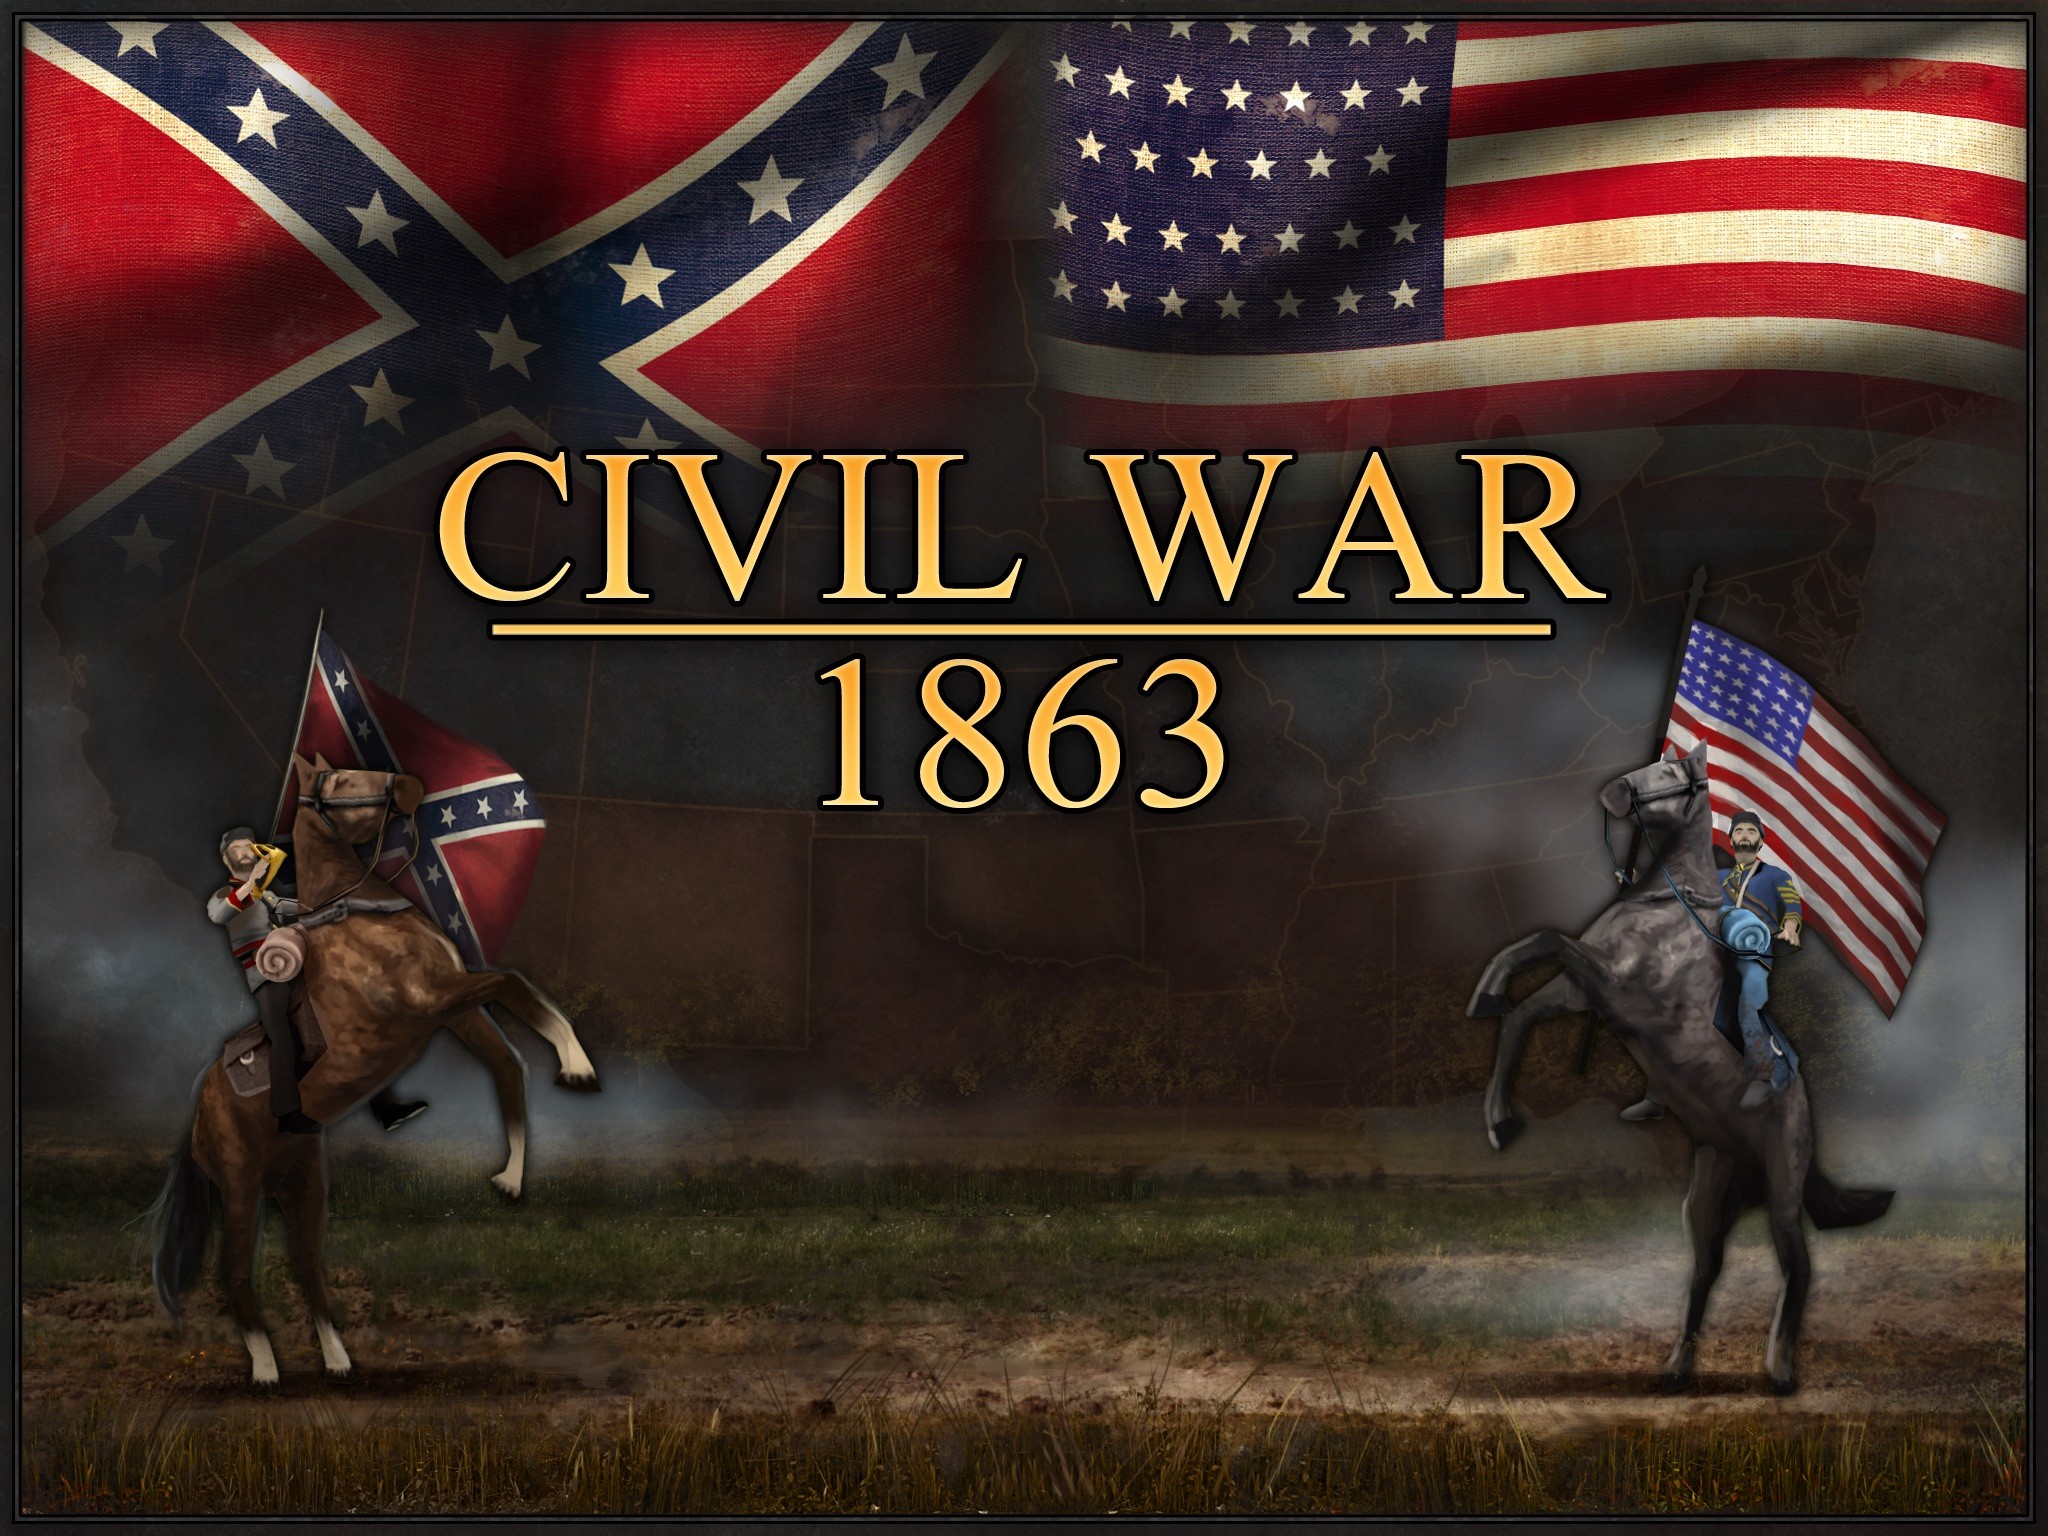 2048x1536 Apple Bans Games And Apps Featuring The Confederate Flag [Update: Some  Games Being Restored] | TechCrunch